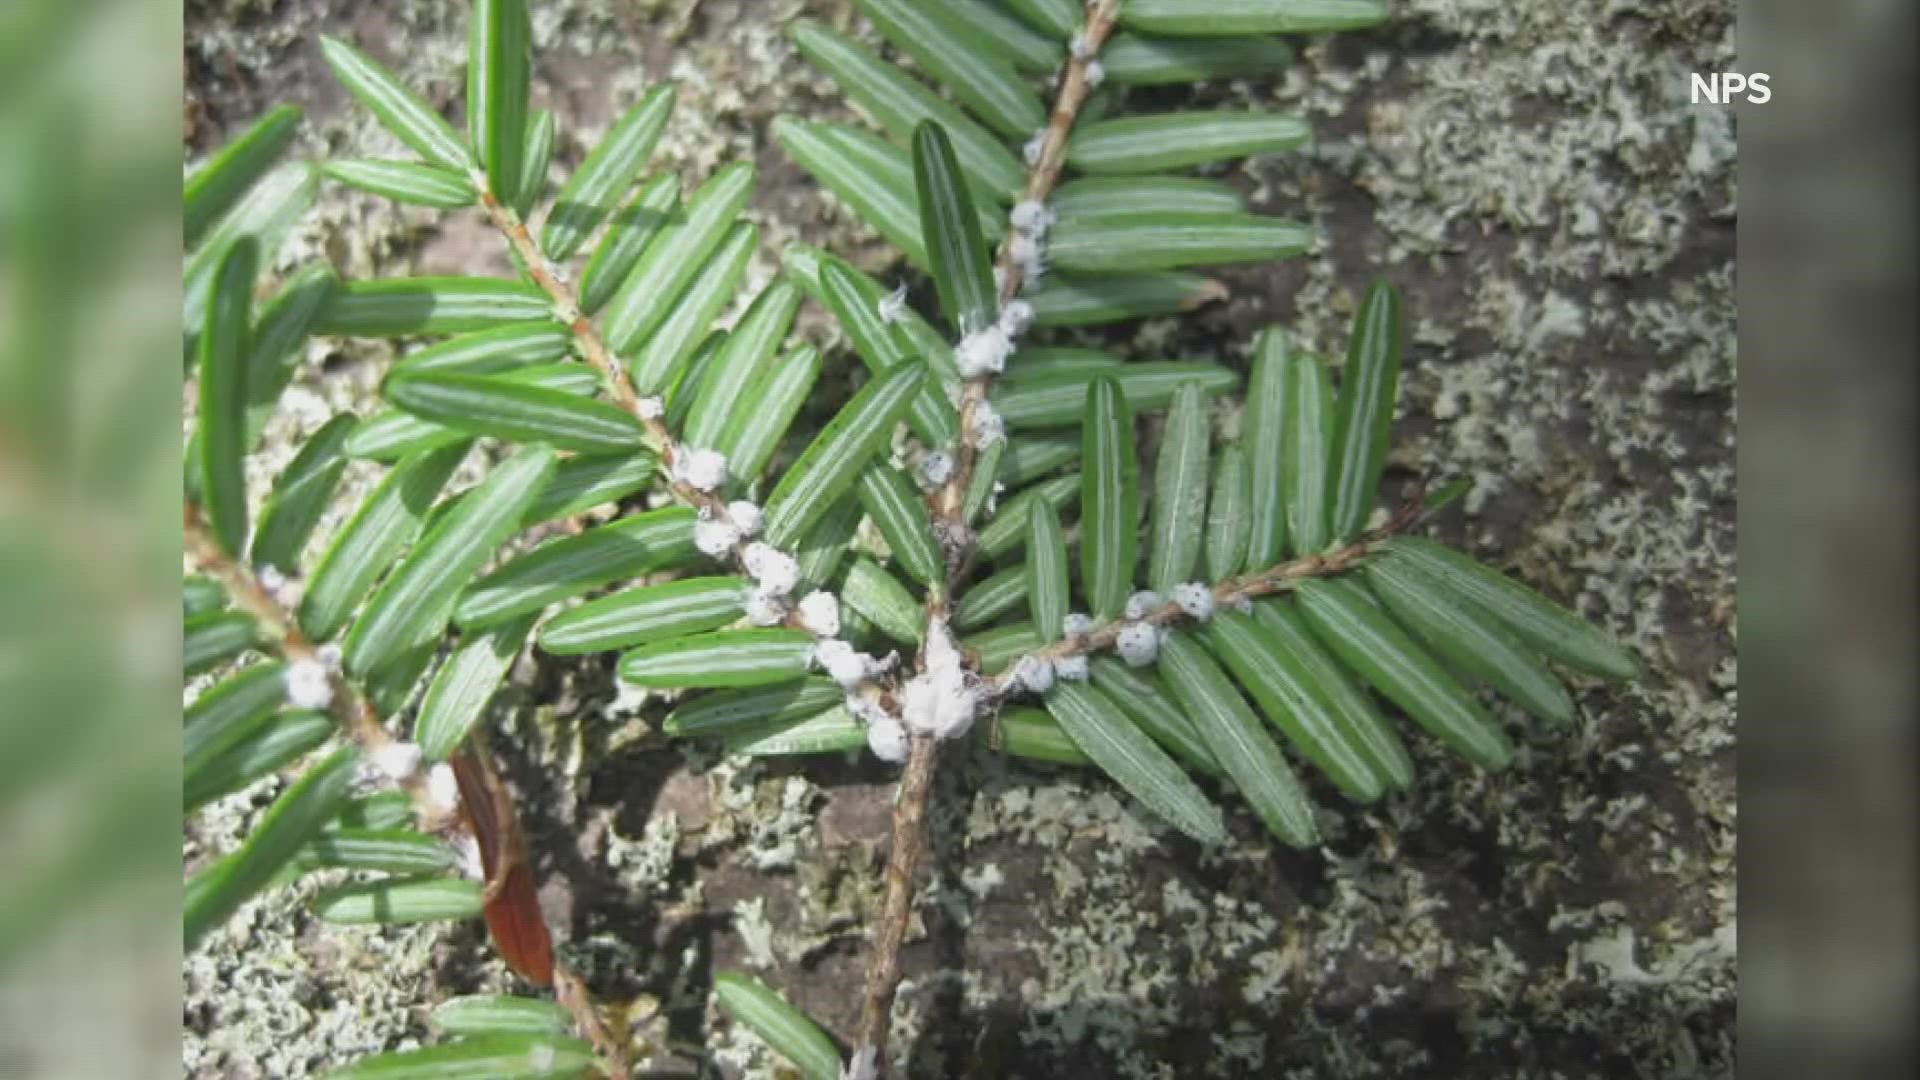 Native to Asia, the hemlock woolly adelgid, or HWA, is an invasive insect that attacks North American hemlocks and it's been discovered in Acadia National Park.